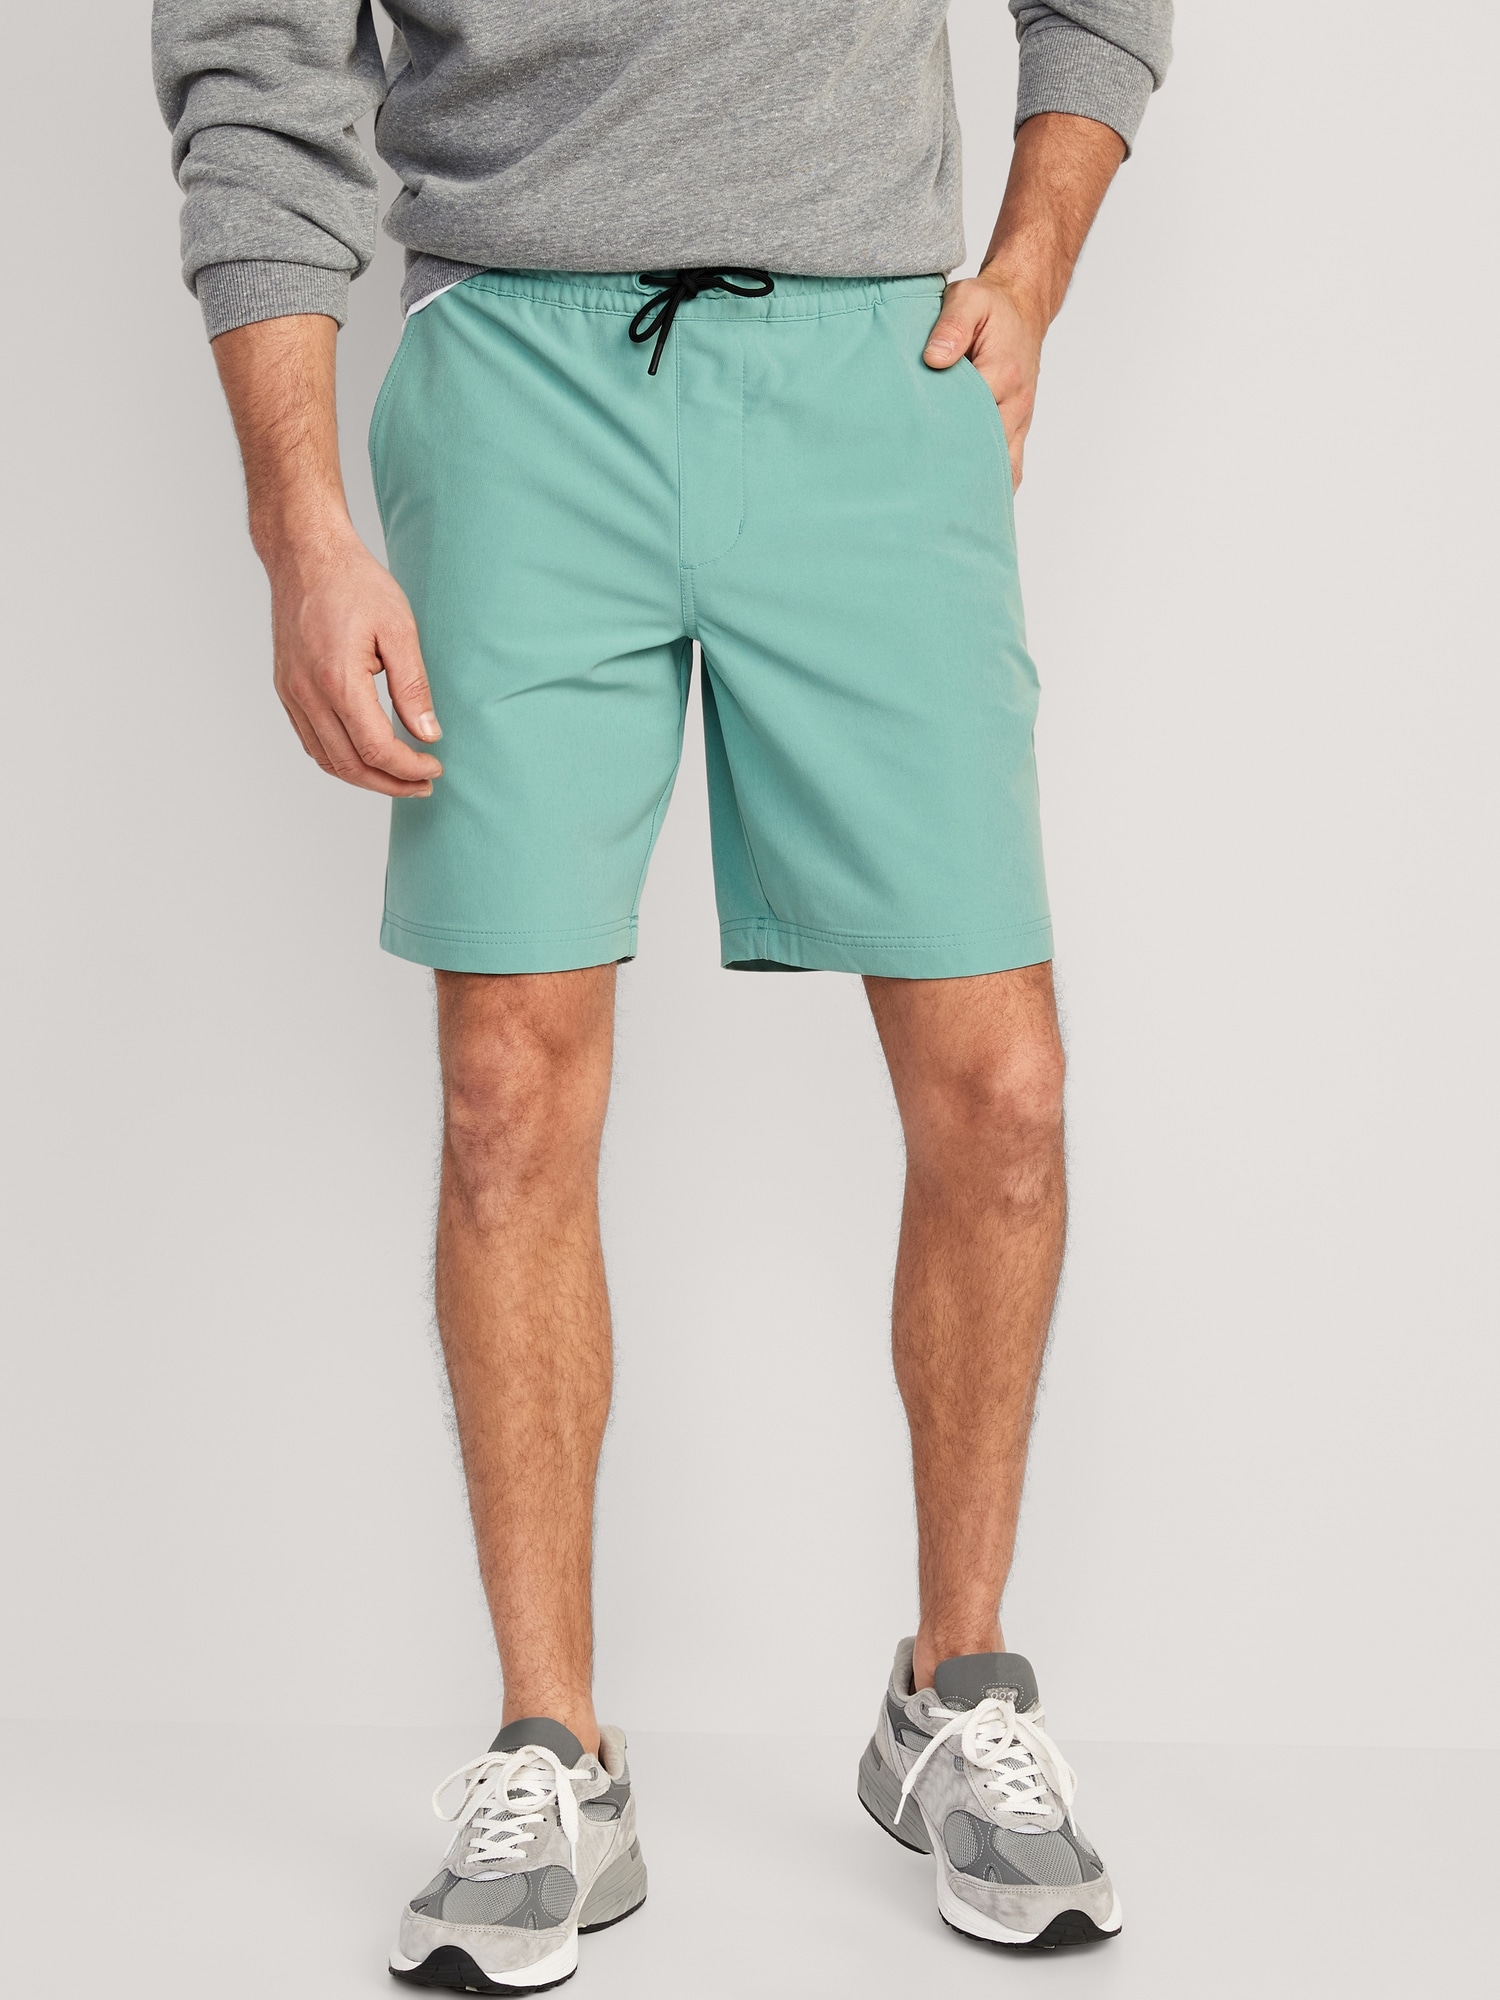 StretchTech Water-Repellent Shorts -- 9-inch inseam Hot Deal